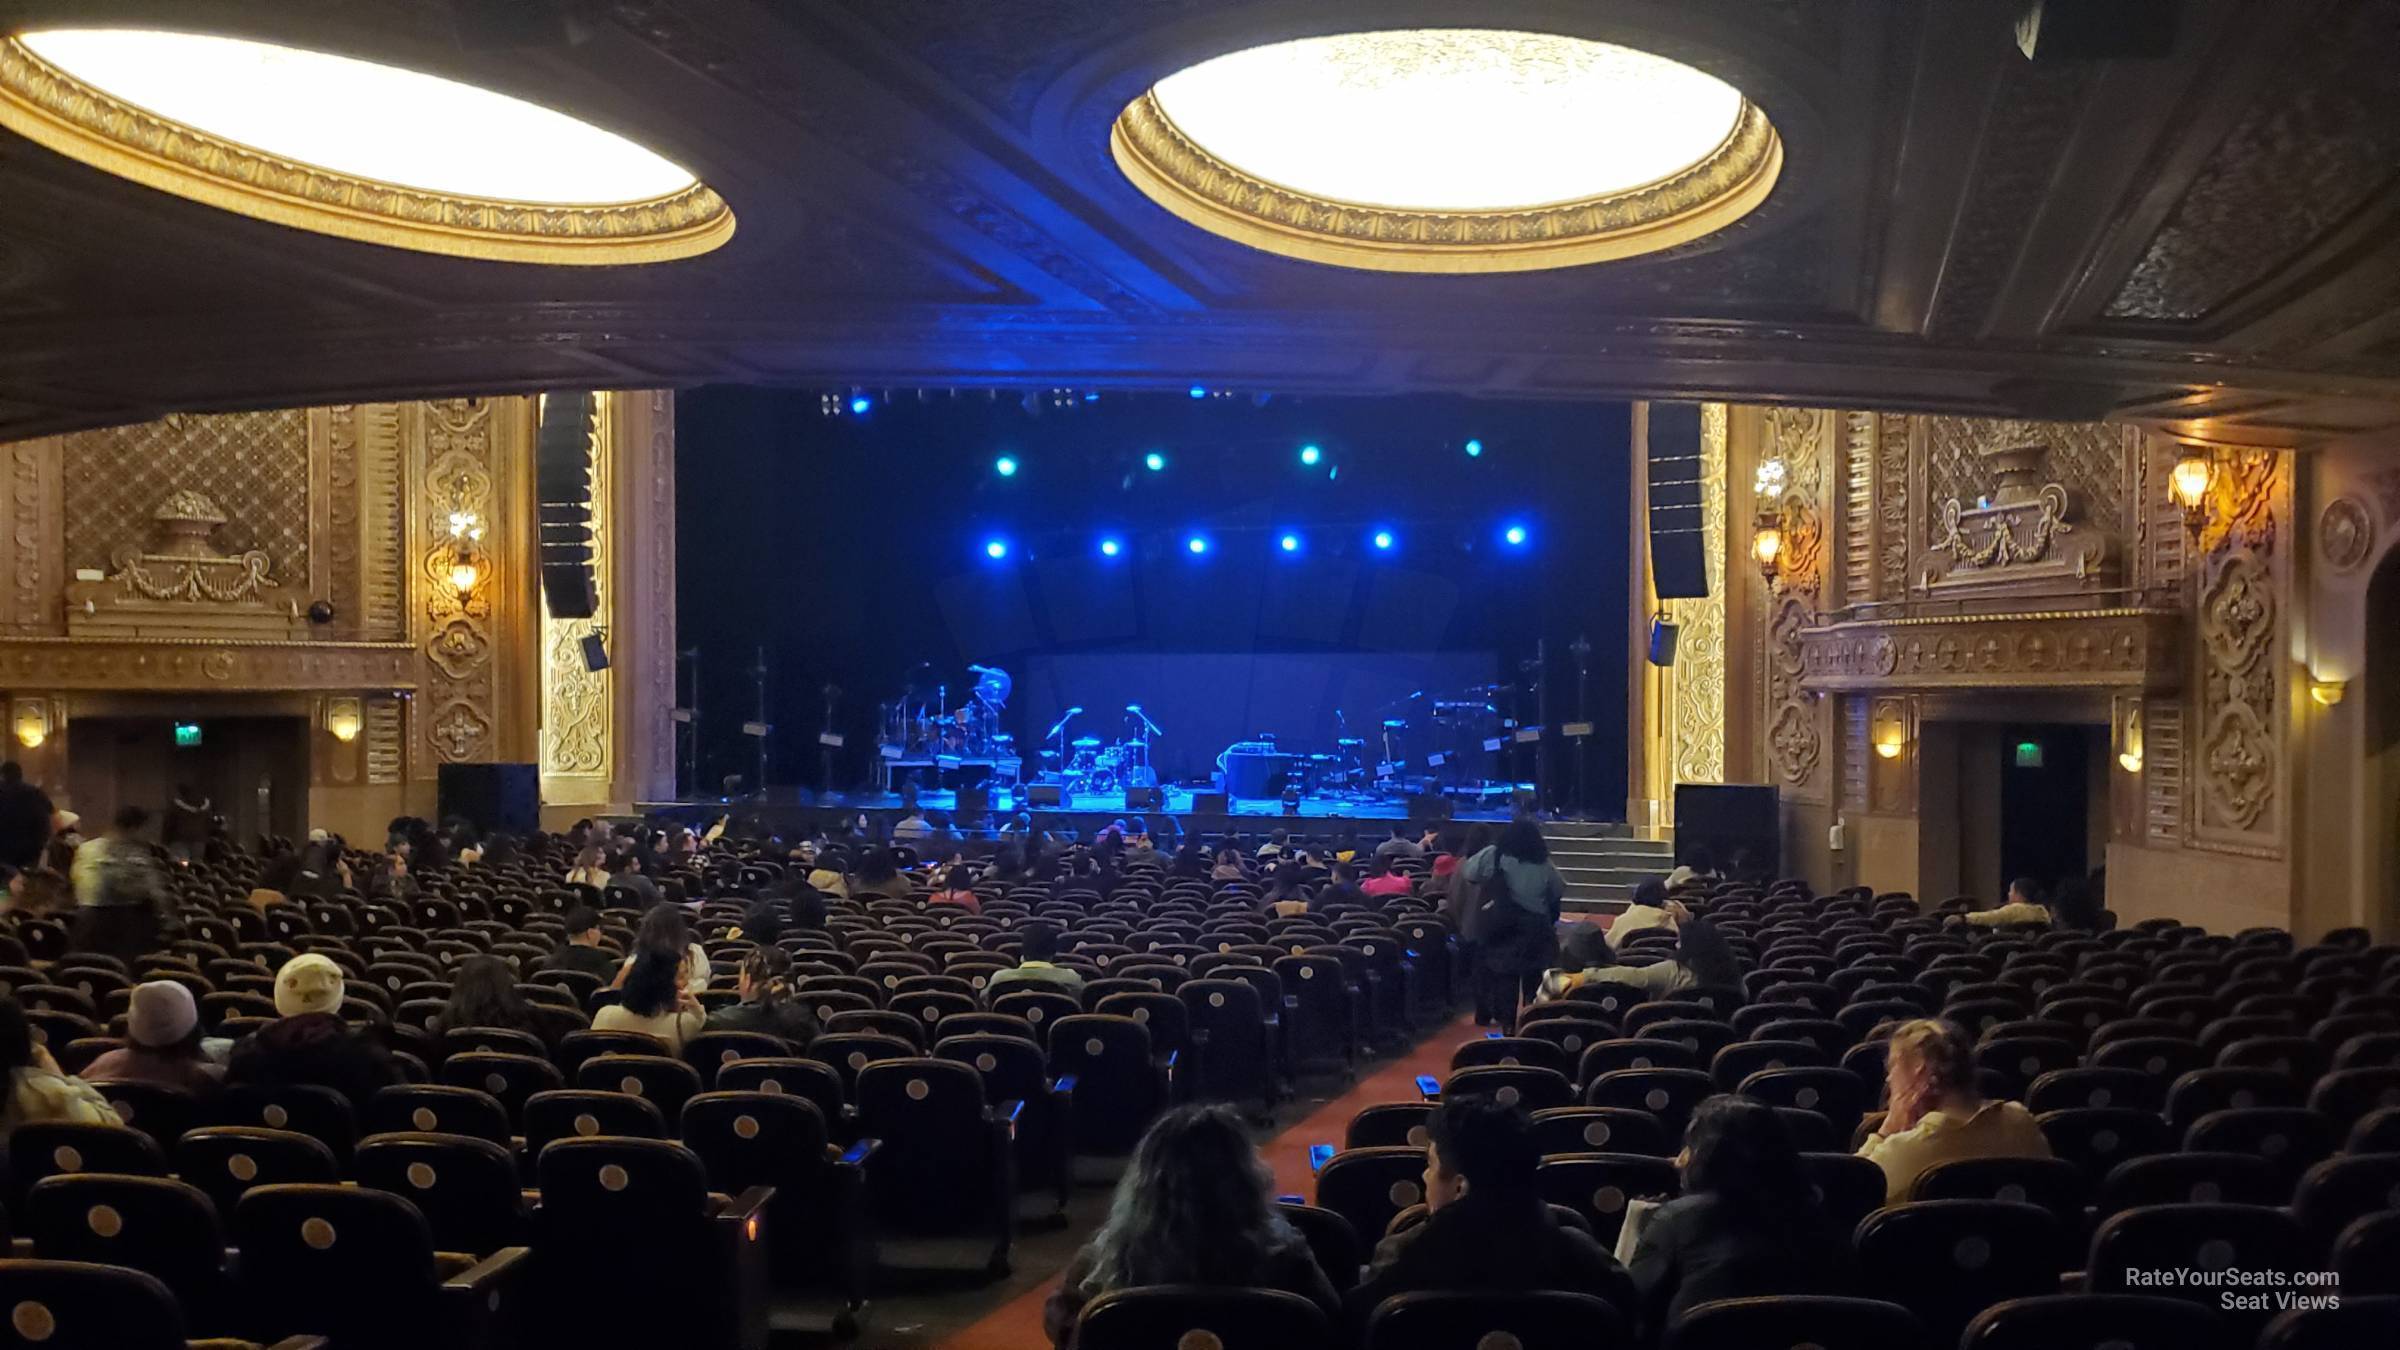 Paramount Theater Seattle Seating Chart View Matttroy